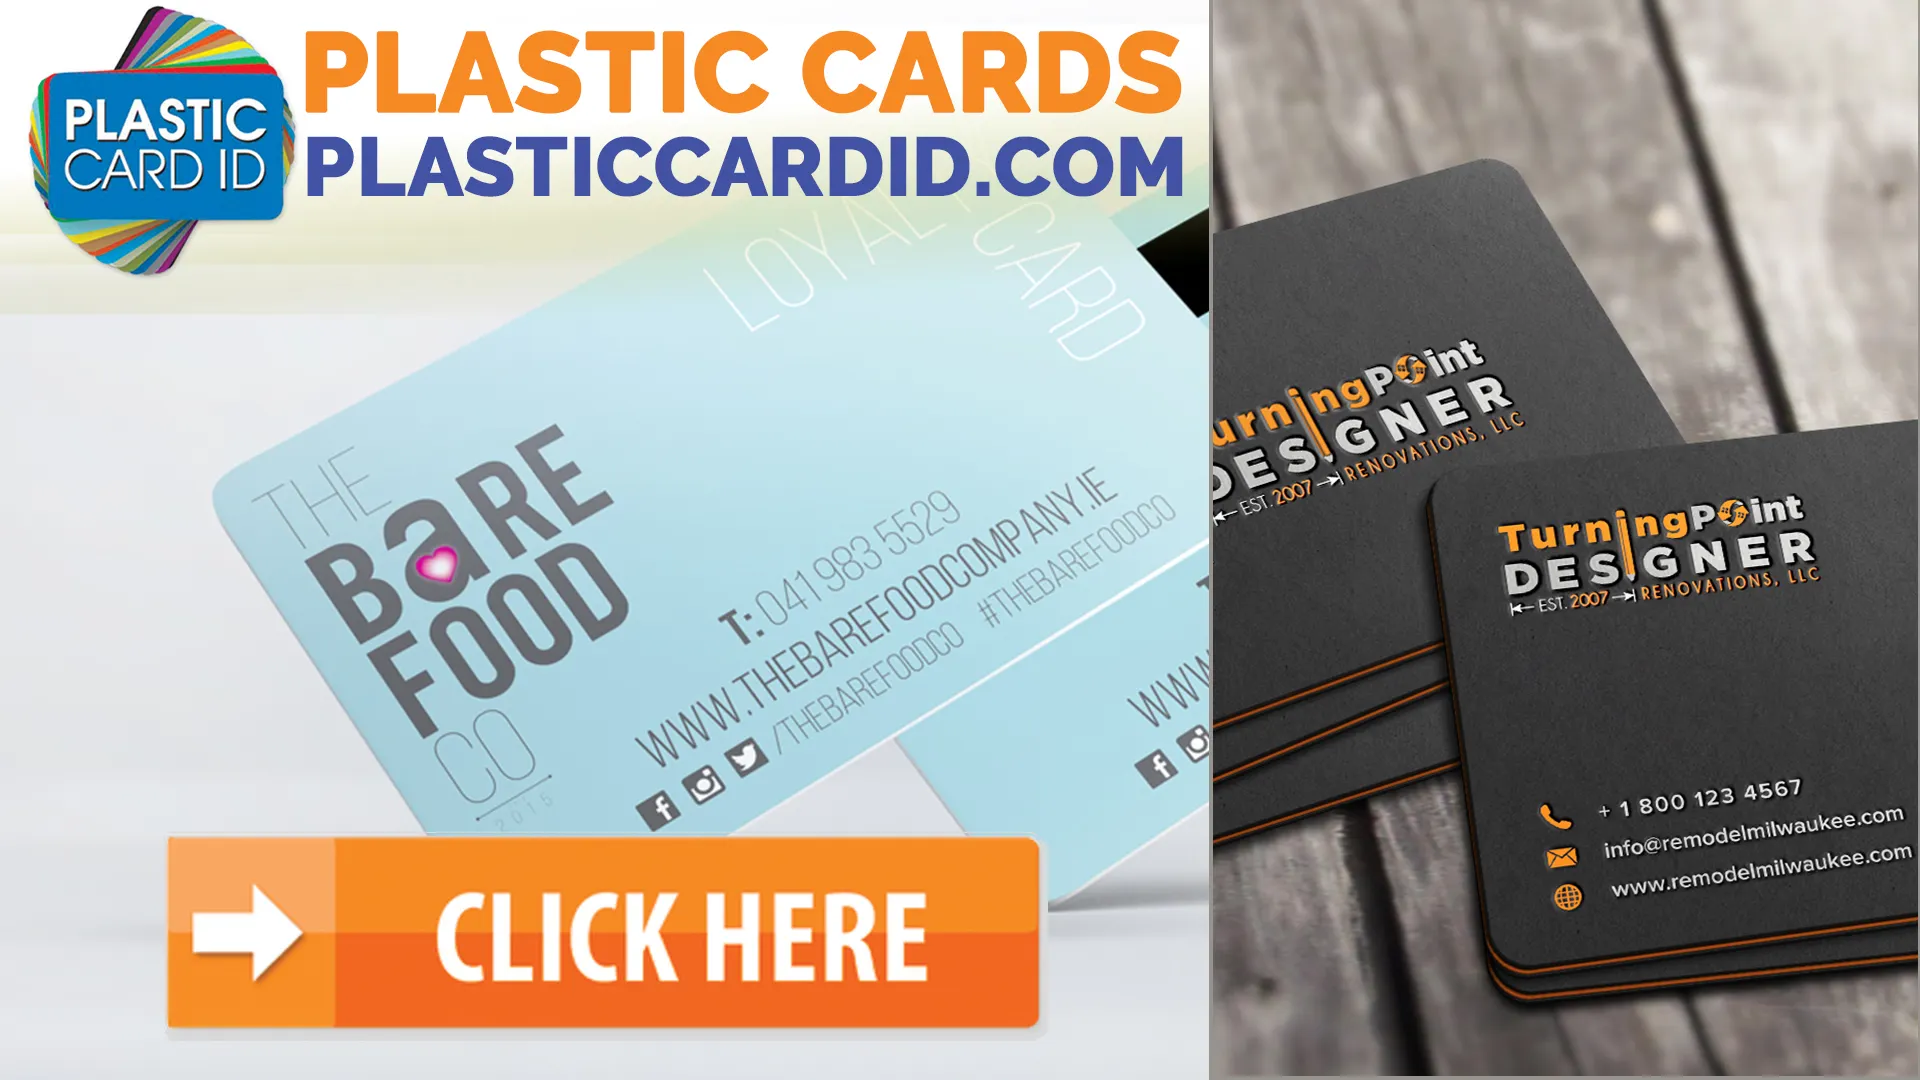 Your Feedback Fuels Our Excellence in Plastic Cards